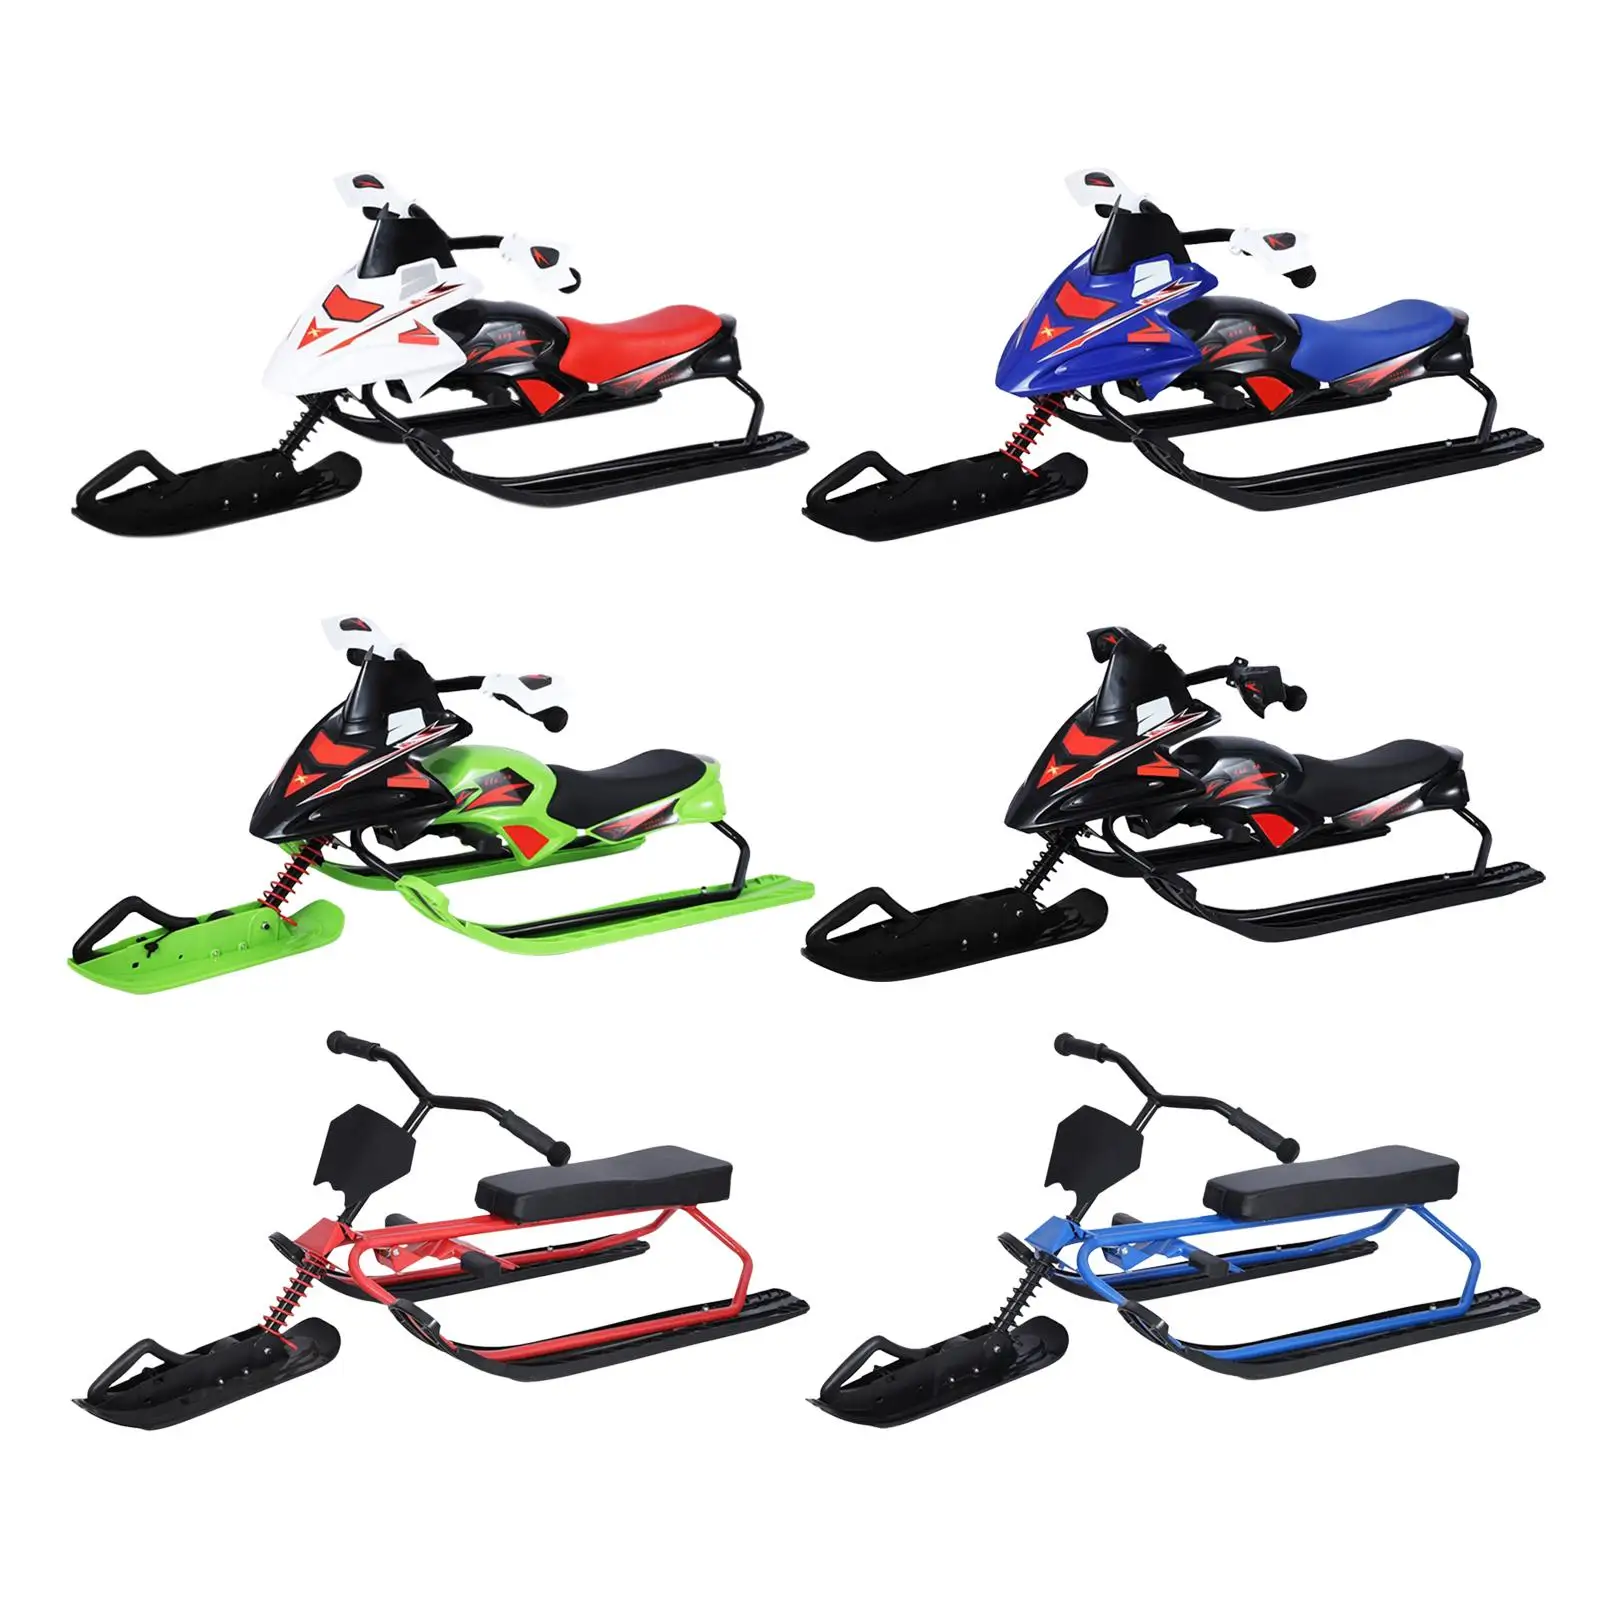 Snow Racer Snow Sled with Steering Wheel Brakes for Downhill and Uphill Ski Sled Slider Board for Adults Teen Kids